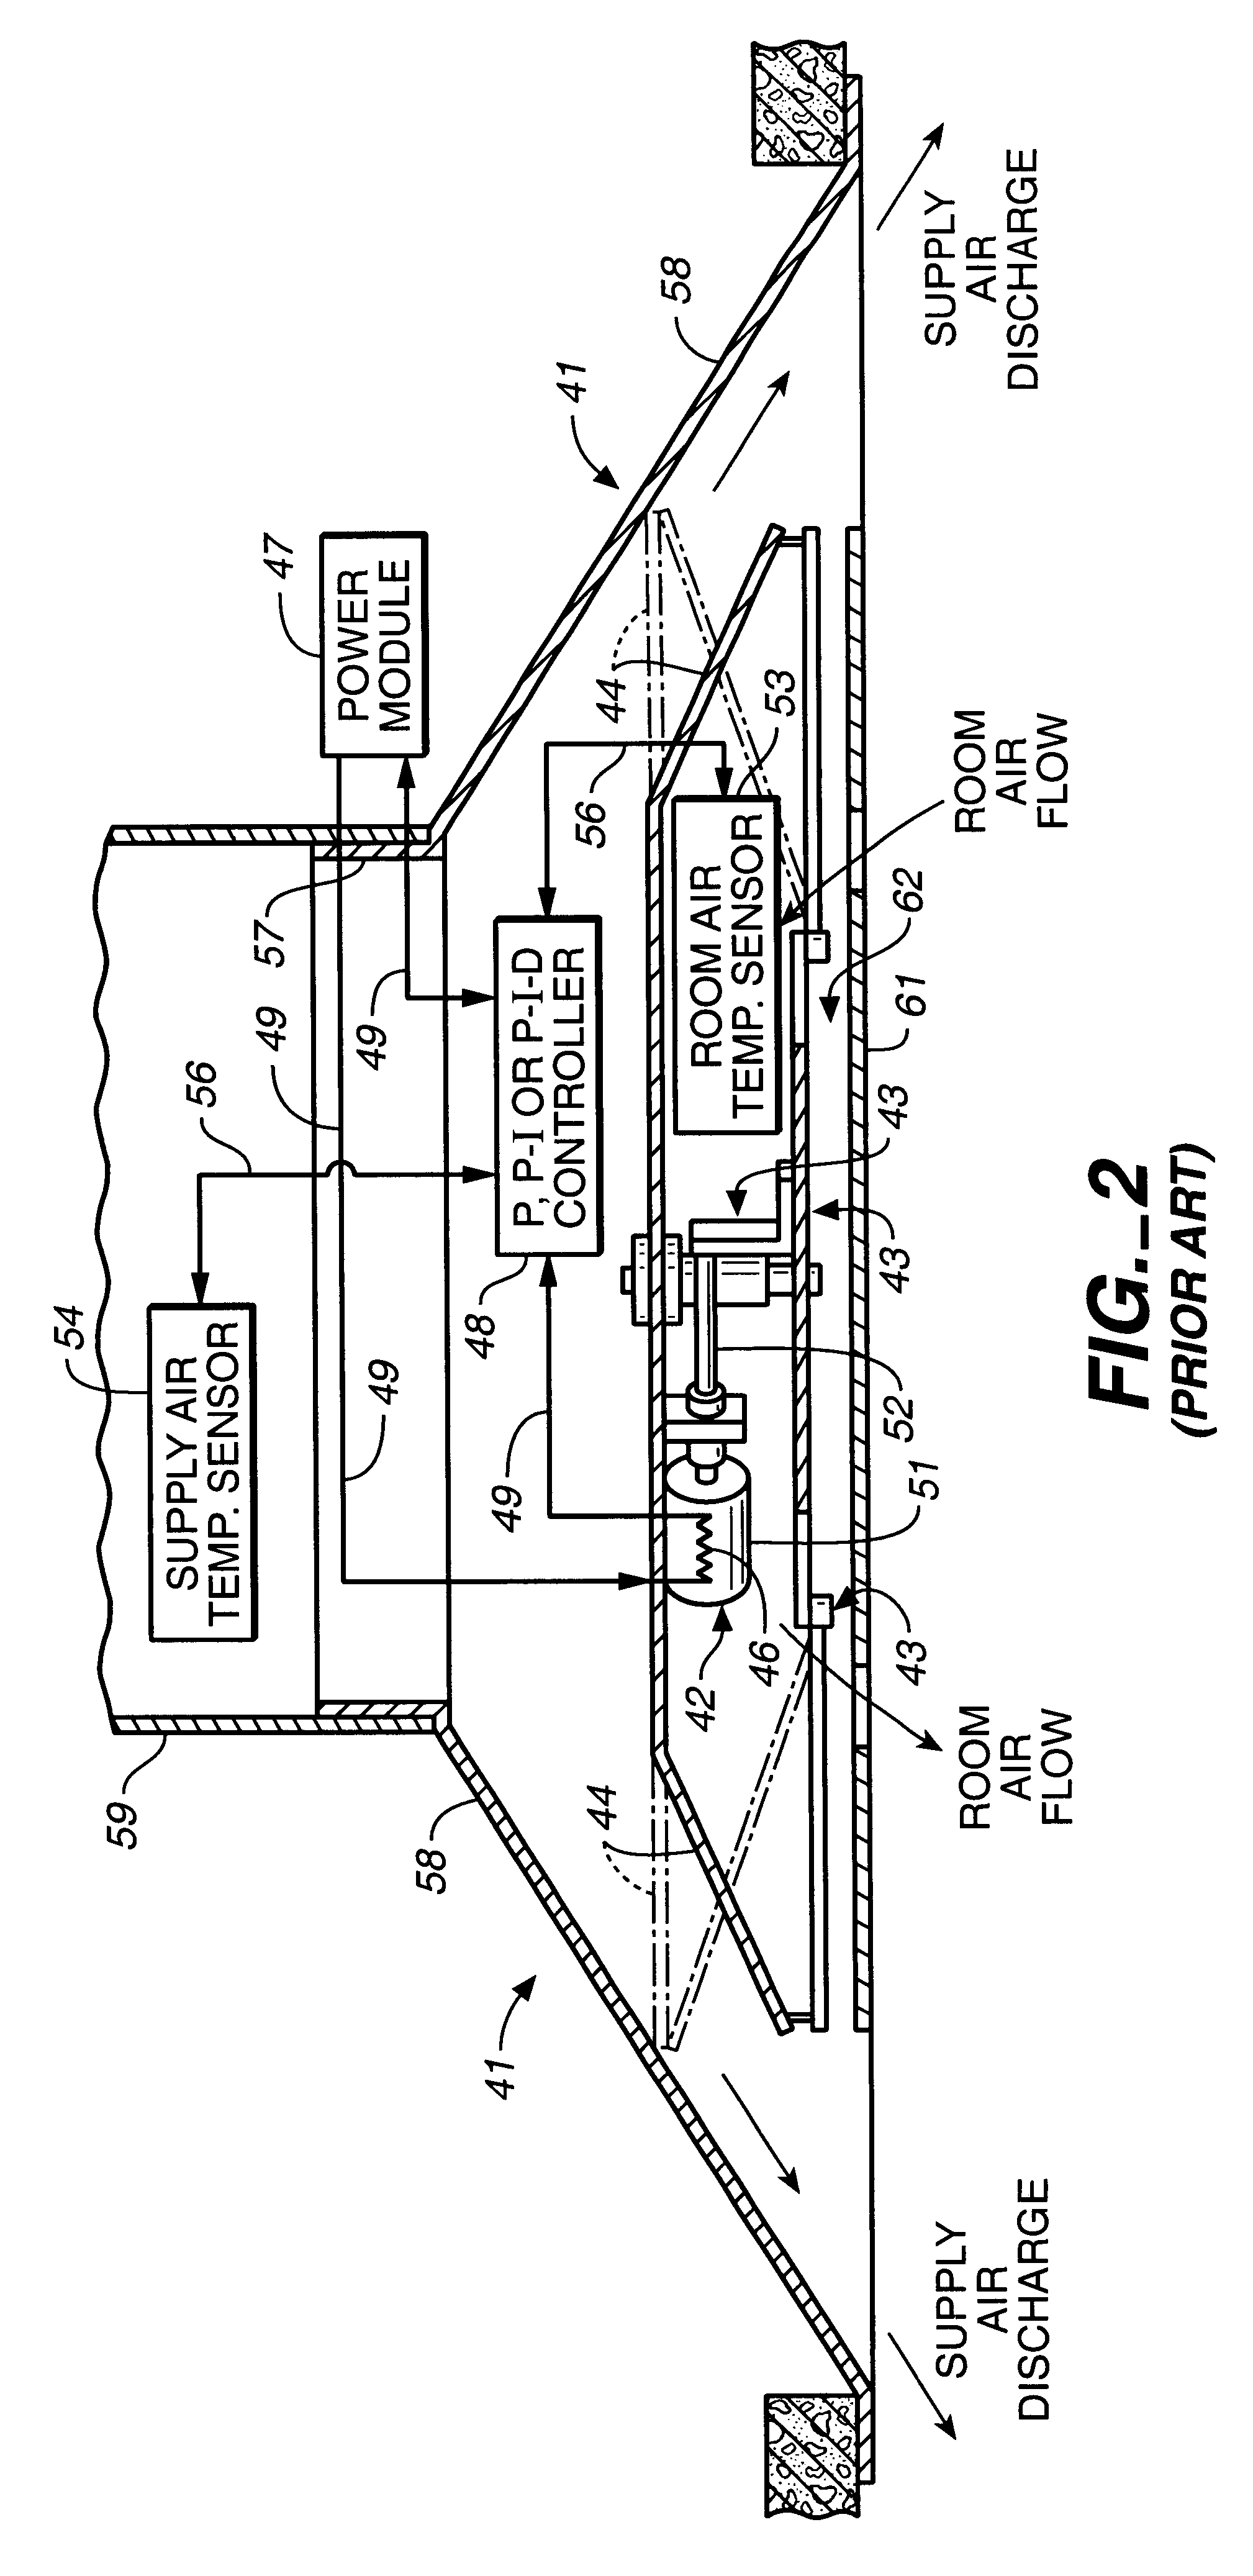 Variable-air-volume diffuser actuator assembly and method